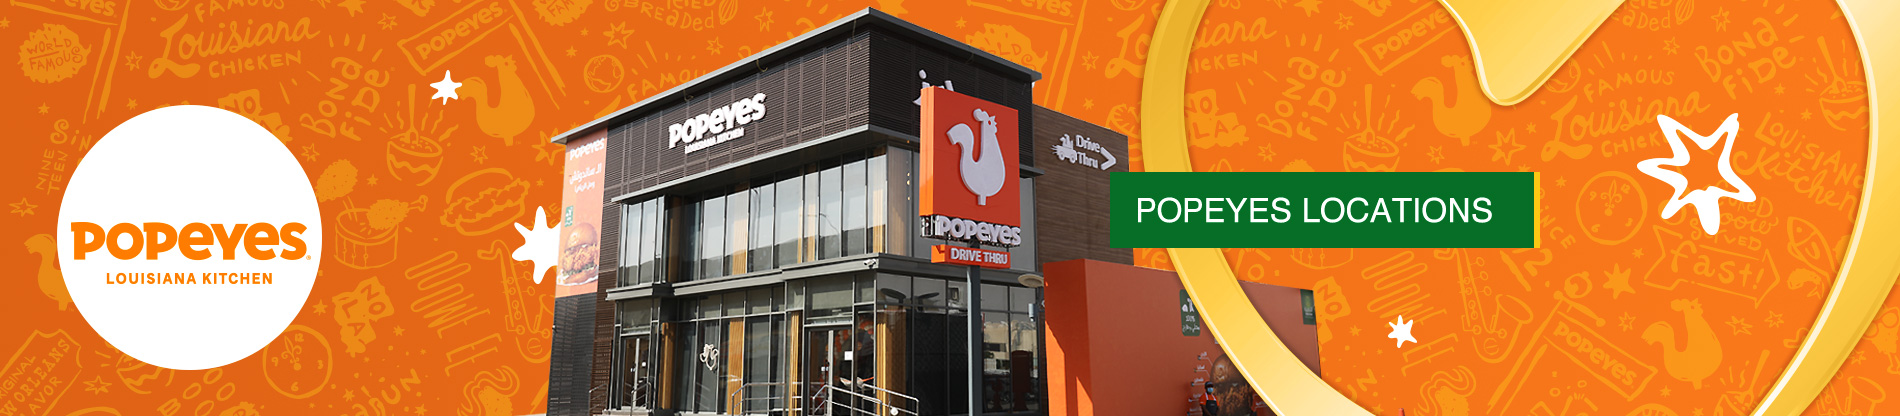 POPEYES Locations - Banner